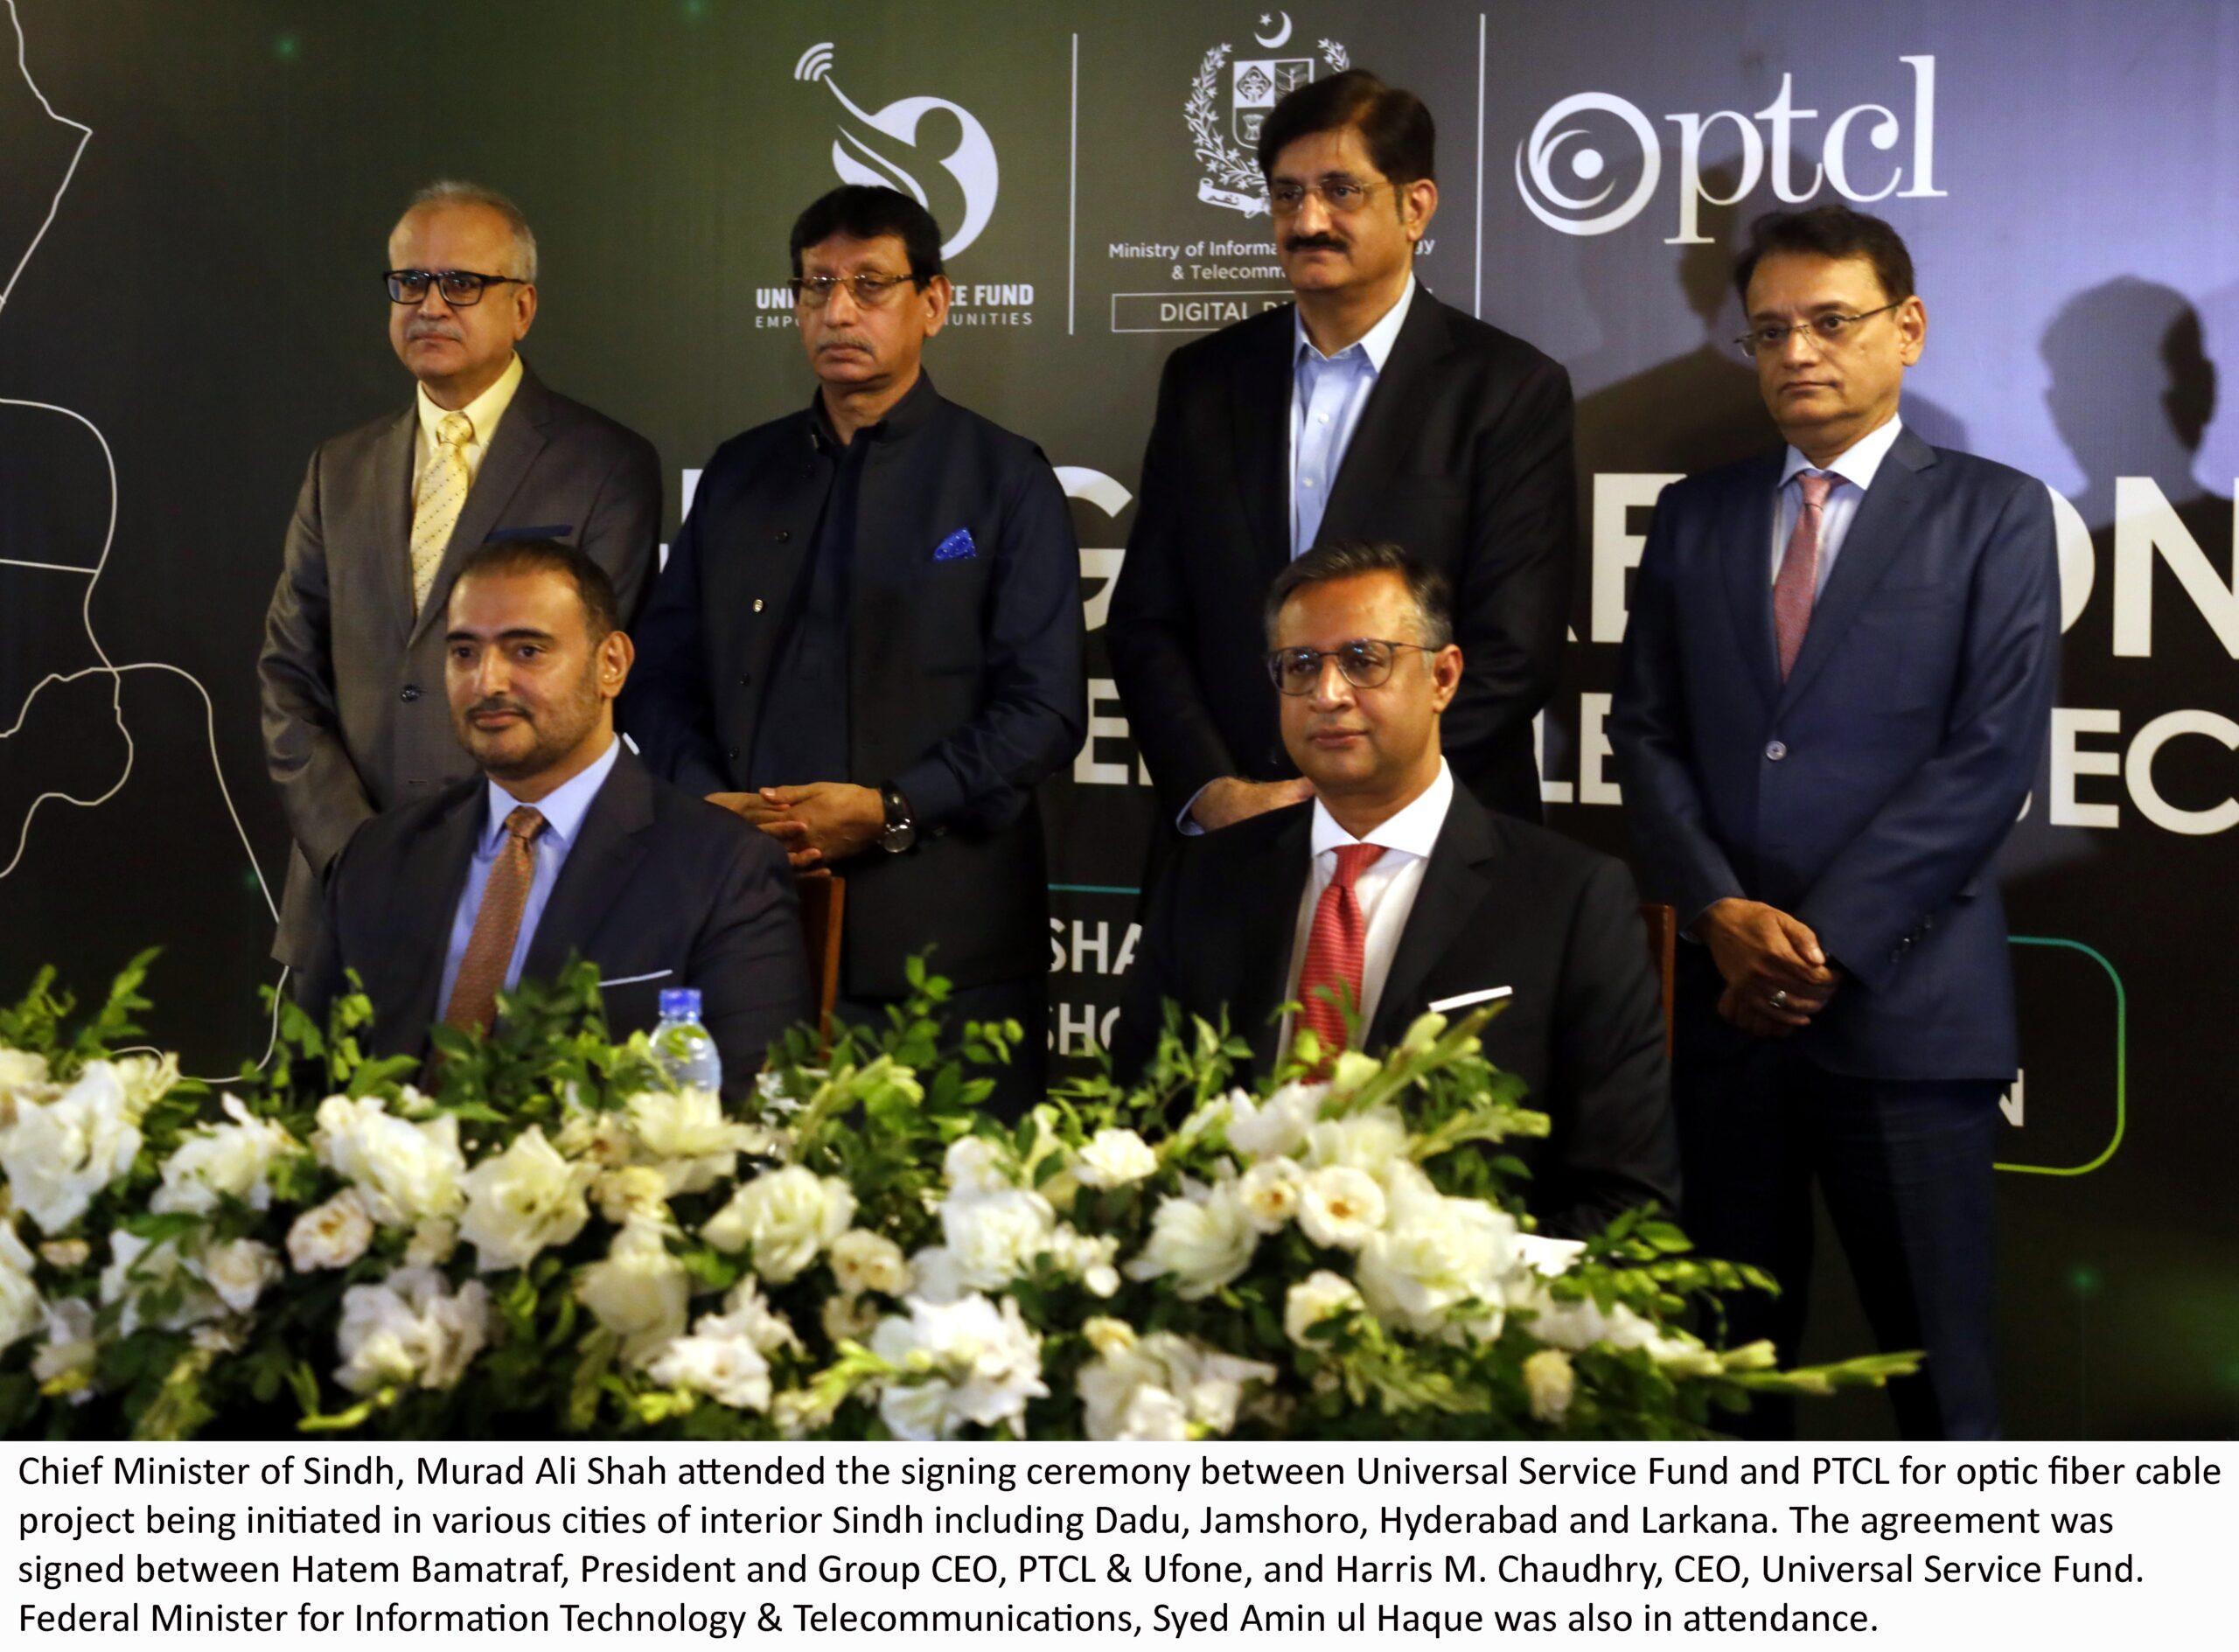 USF and PTCL sign agreement for the optic fiber cable in interior Sindh including Dadu Jamshoro Hyderabad and Larkana